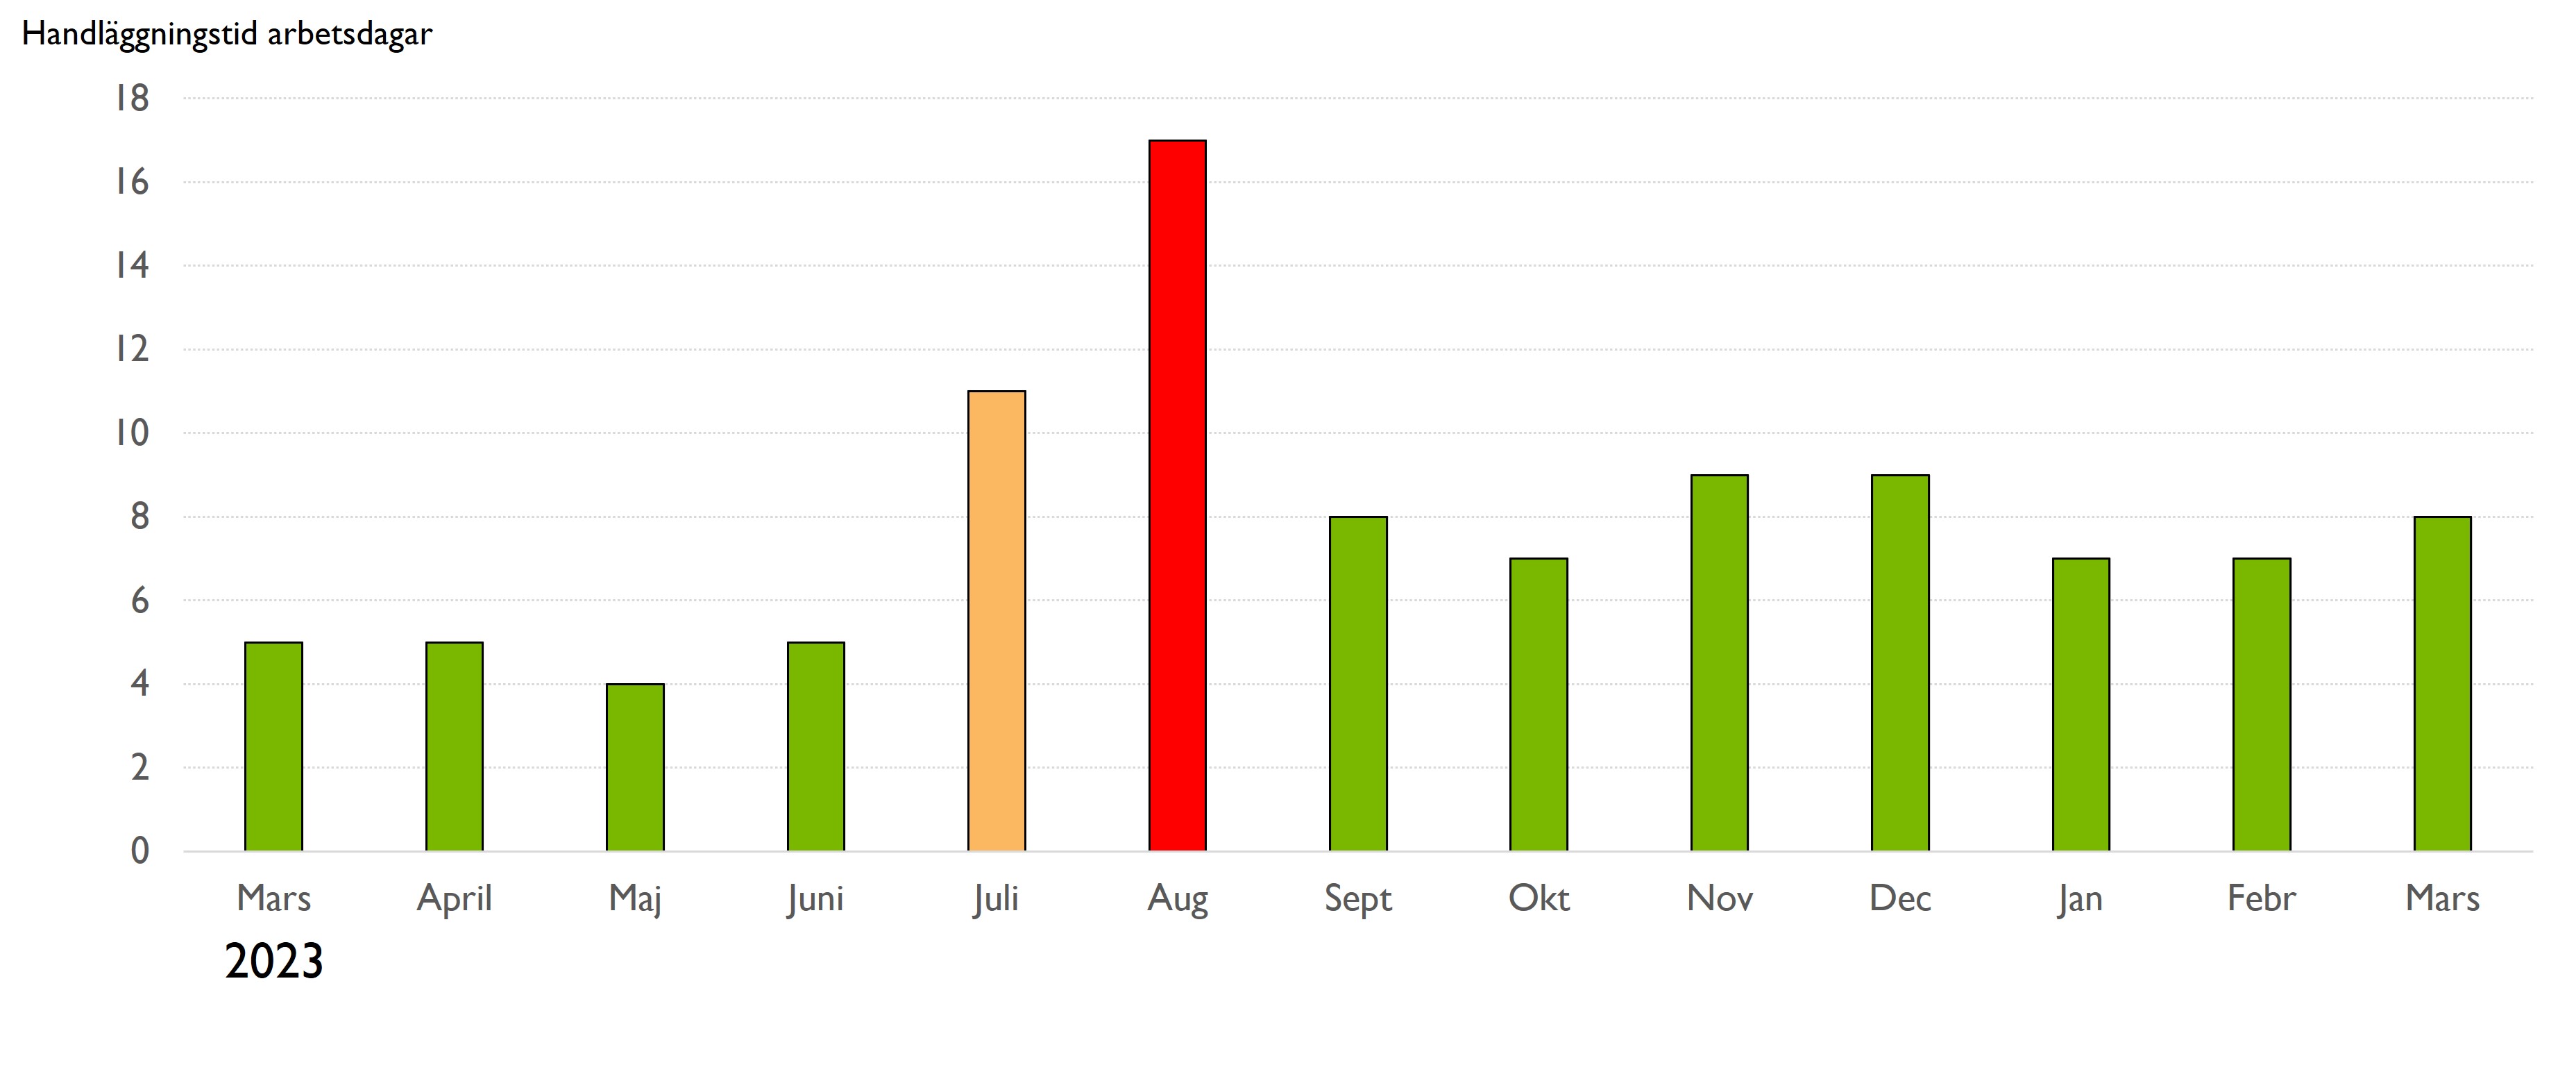 Bar chart showing the months from November 2022 to November 2023. Each month has a bar in red, orange or green. Green means 4-9 days. Orange means 10-12 days. Red means 13 days. The following colors are set for the months in 2022: November is orange. December is green. The following colors are set for the months of 2023: January, February, March, April, May, June are green. July is orange. August is red. September, October and November are green.